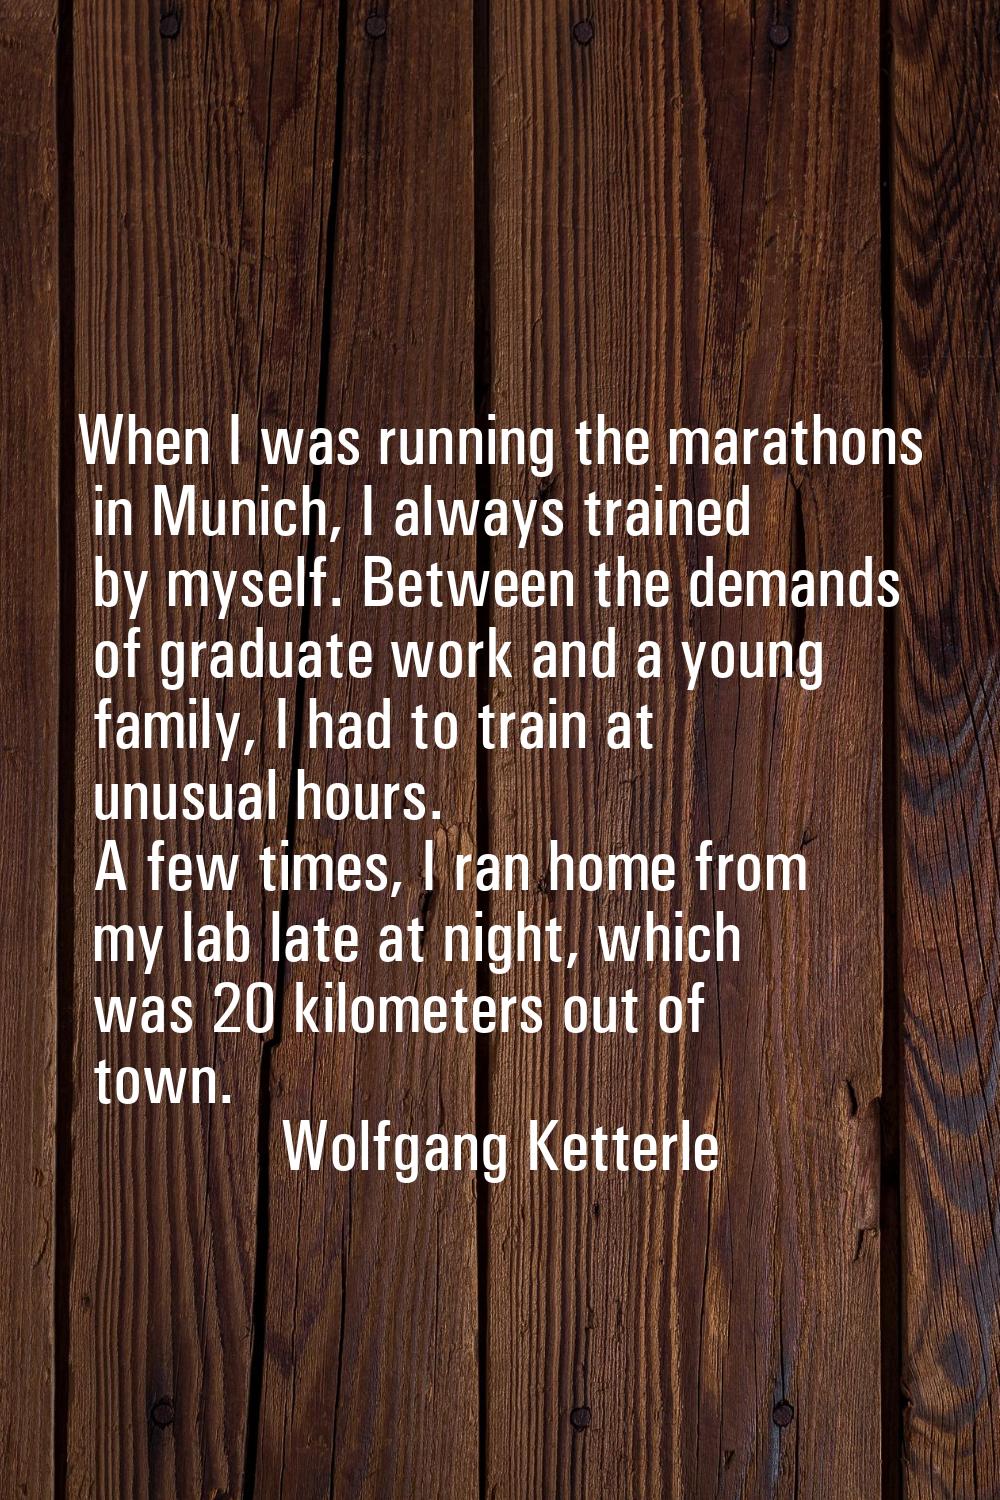 When I was running the marathons in Munich, I always trained by myself. Between the demands of grad